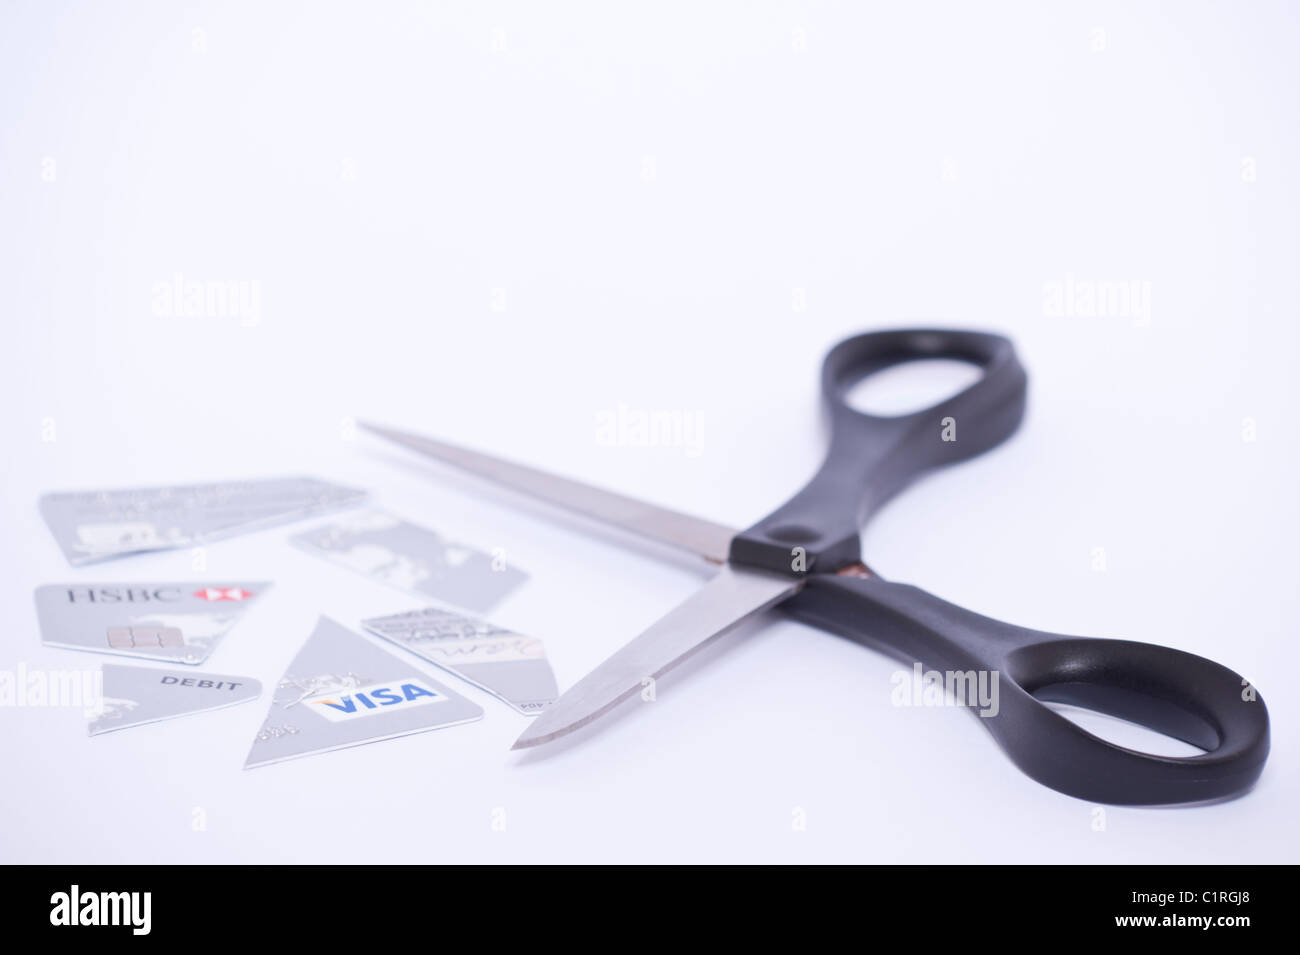 A Debit card having been cut up with a pair of scissors on a white background Stock Photo